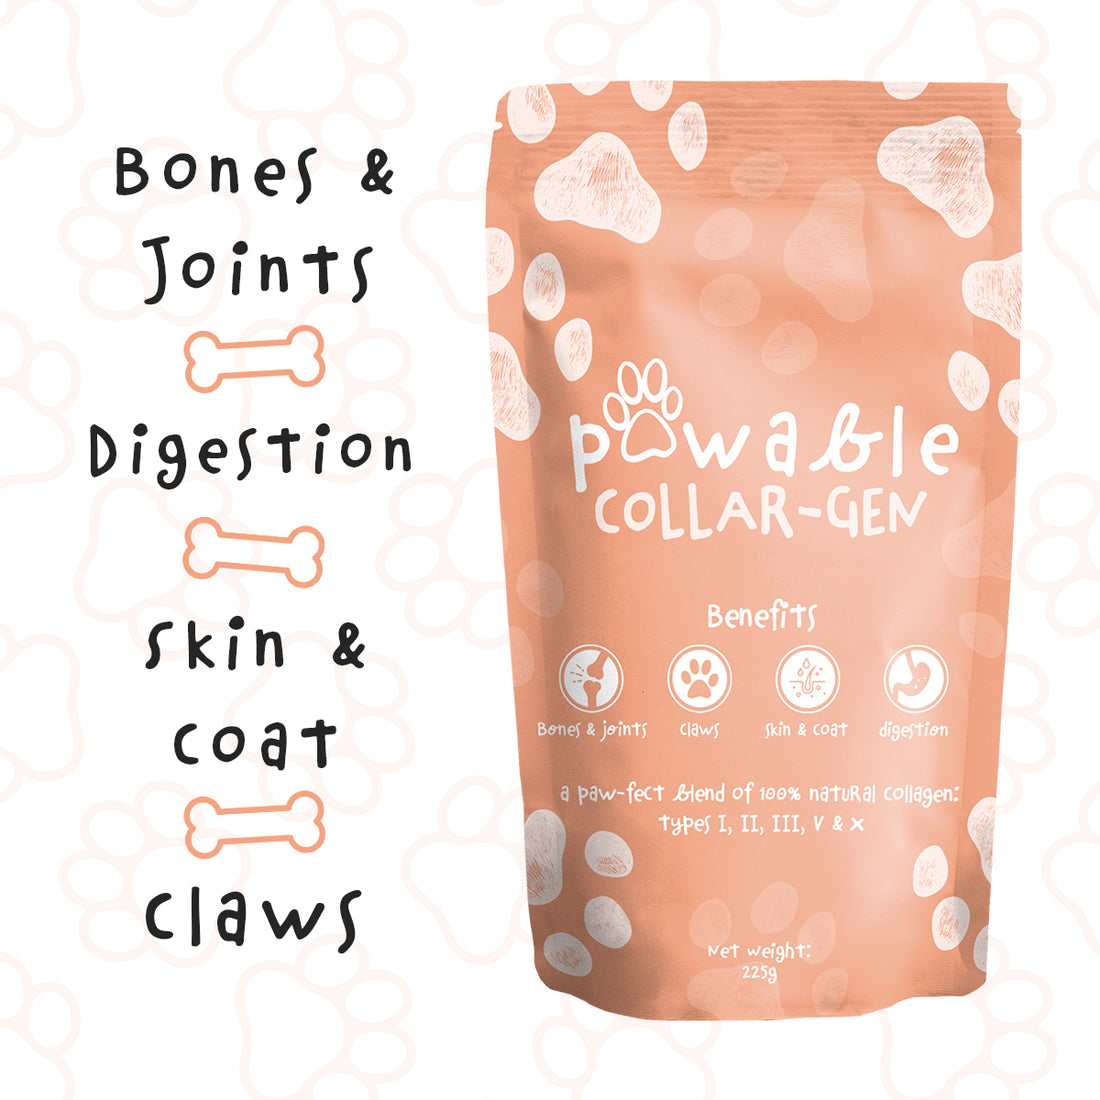 Pawable - Collagen for dog's